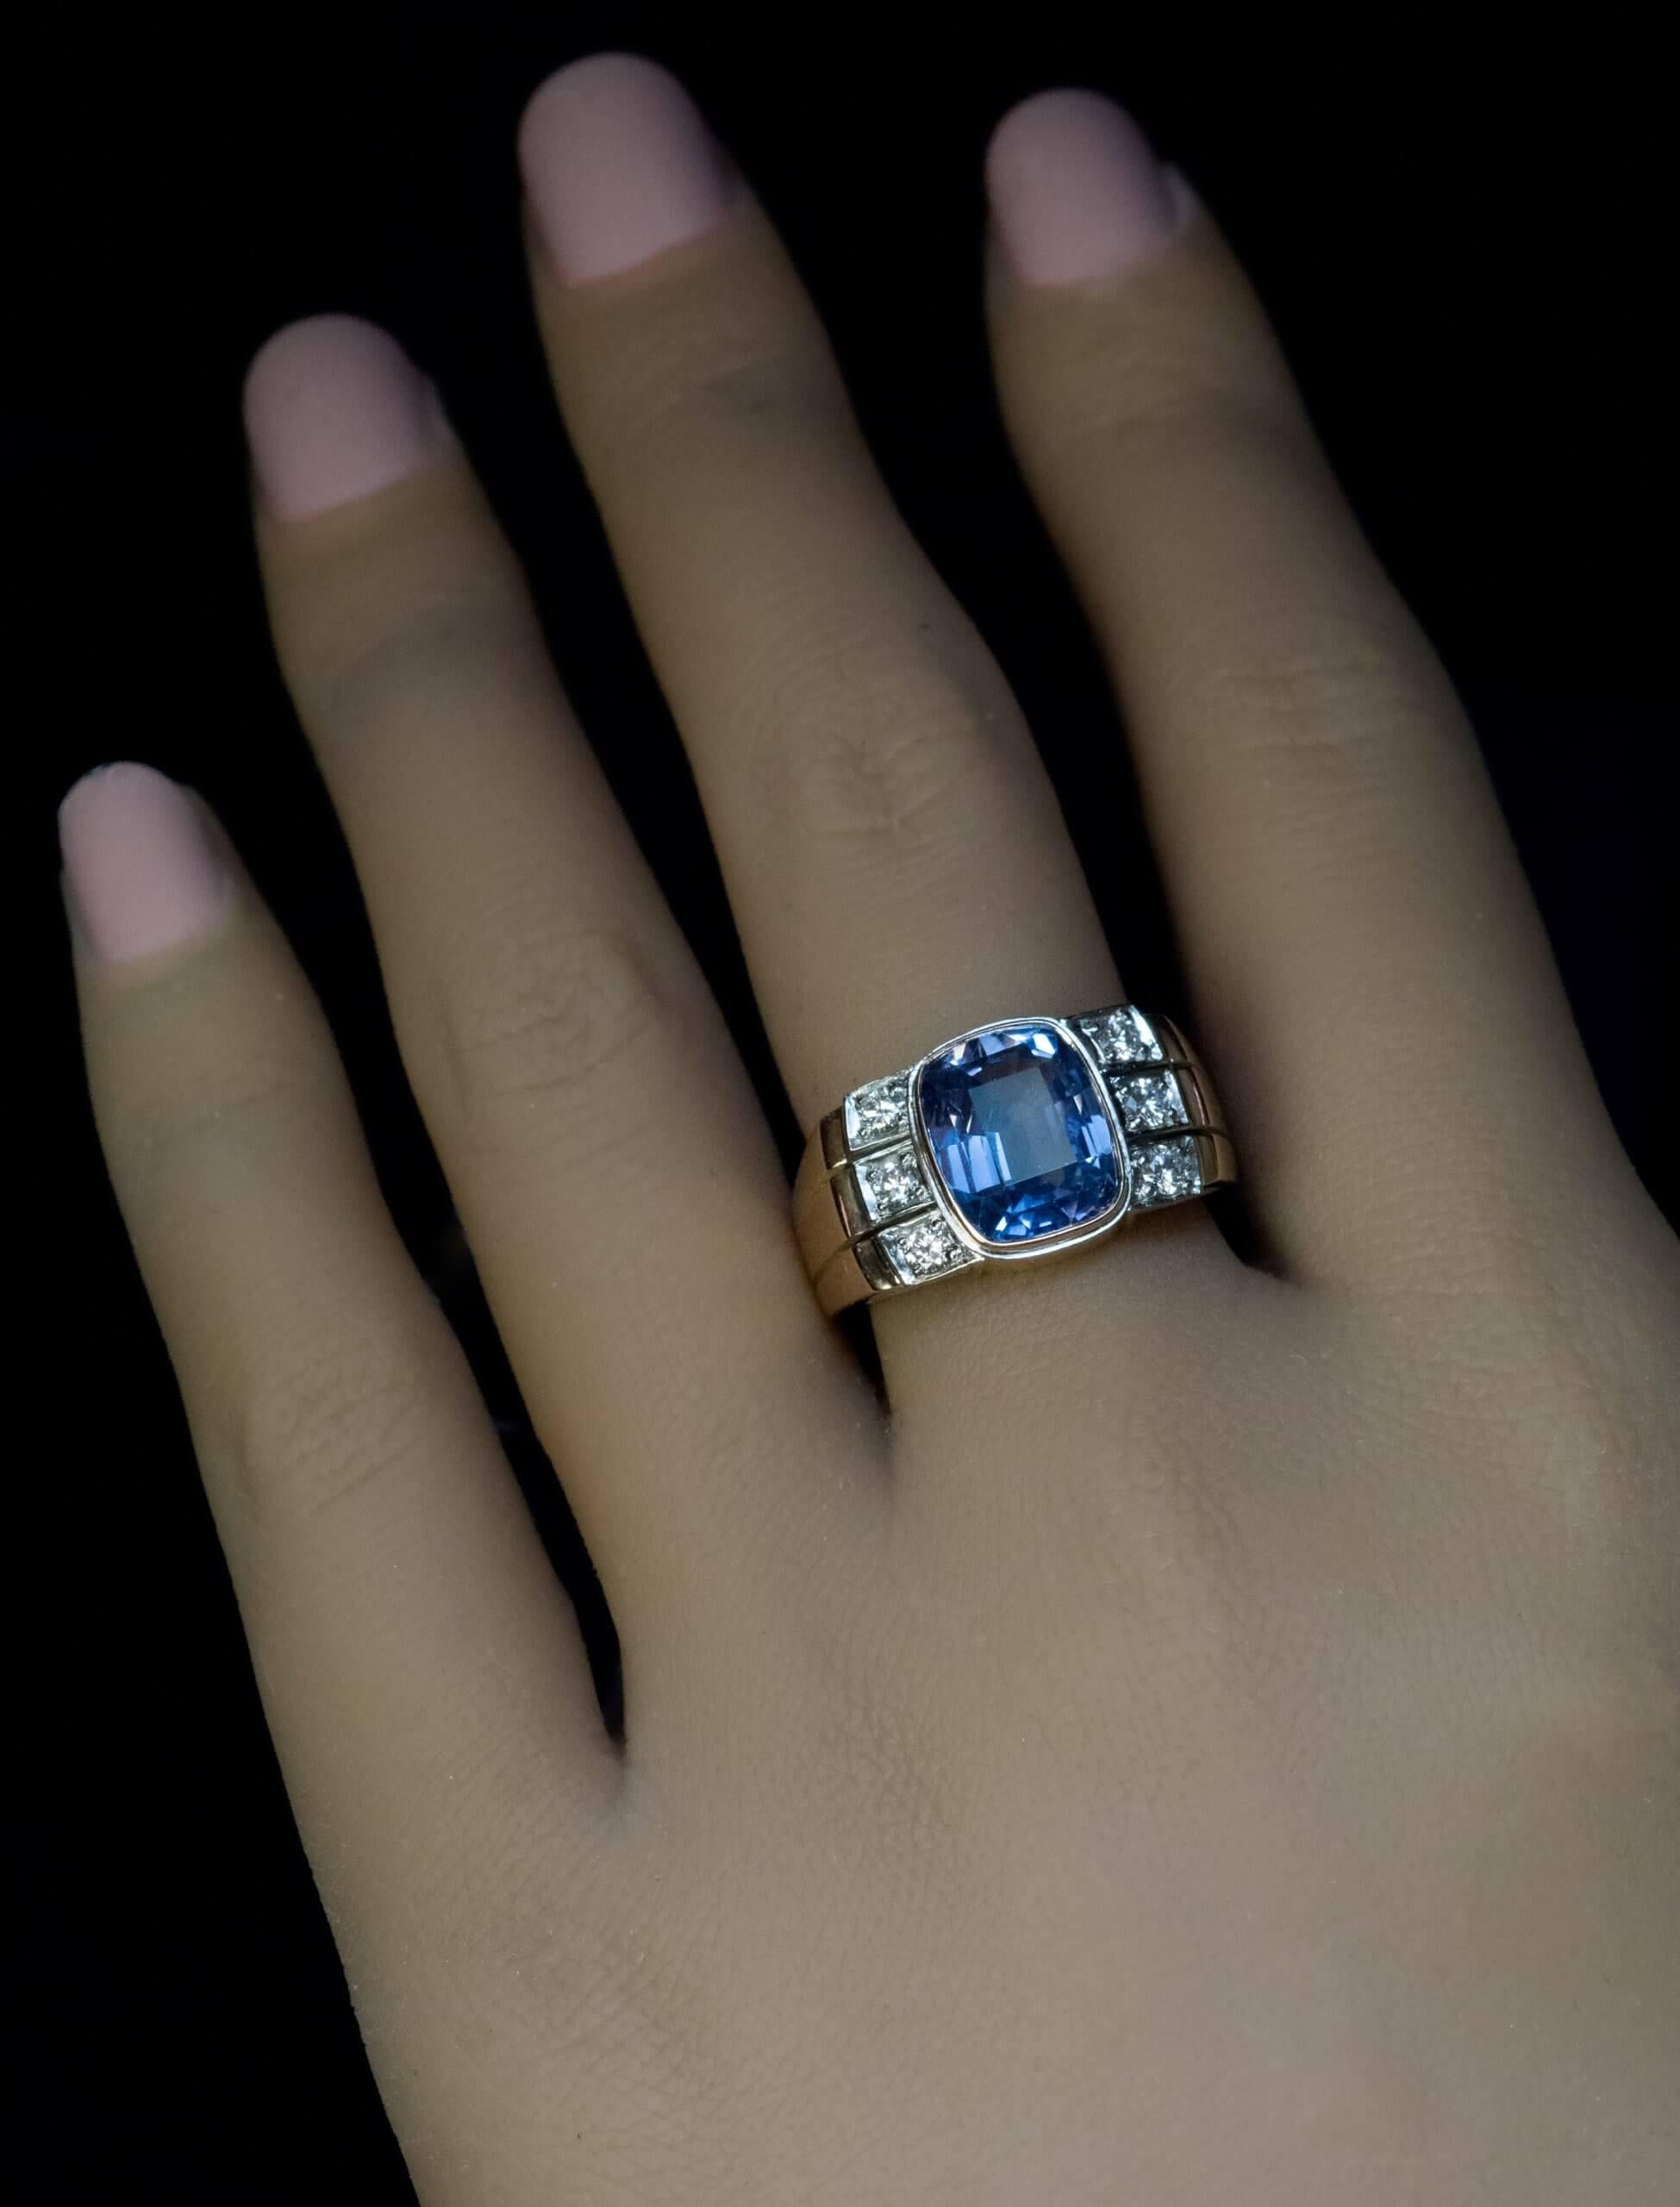 Circa 1970  The ring is crafted in yellow and white 14K gold. It features a 5.18 carat unheated blue sapphire from Ceylon. The sapphire is accented by six small diamonds (F color, VVS2-VS1 clarity).  The ring is accompanied by the ALGT (Antwerp,